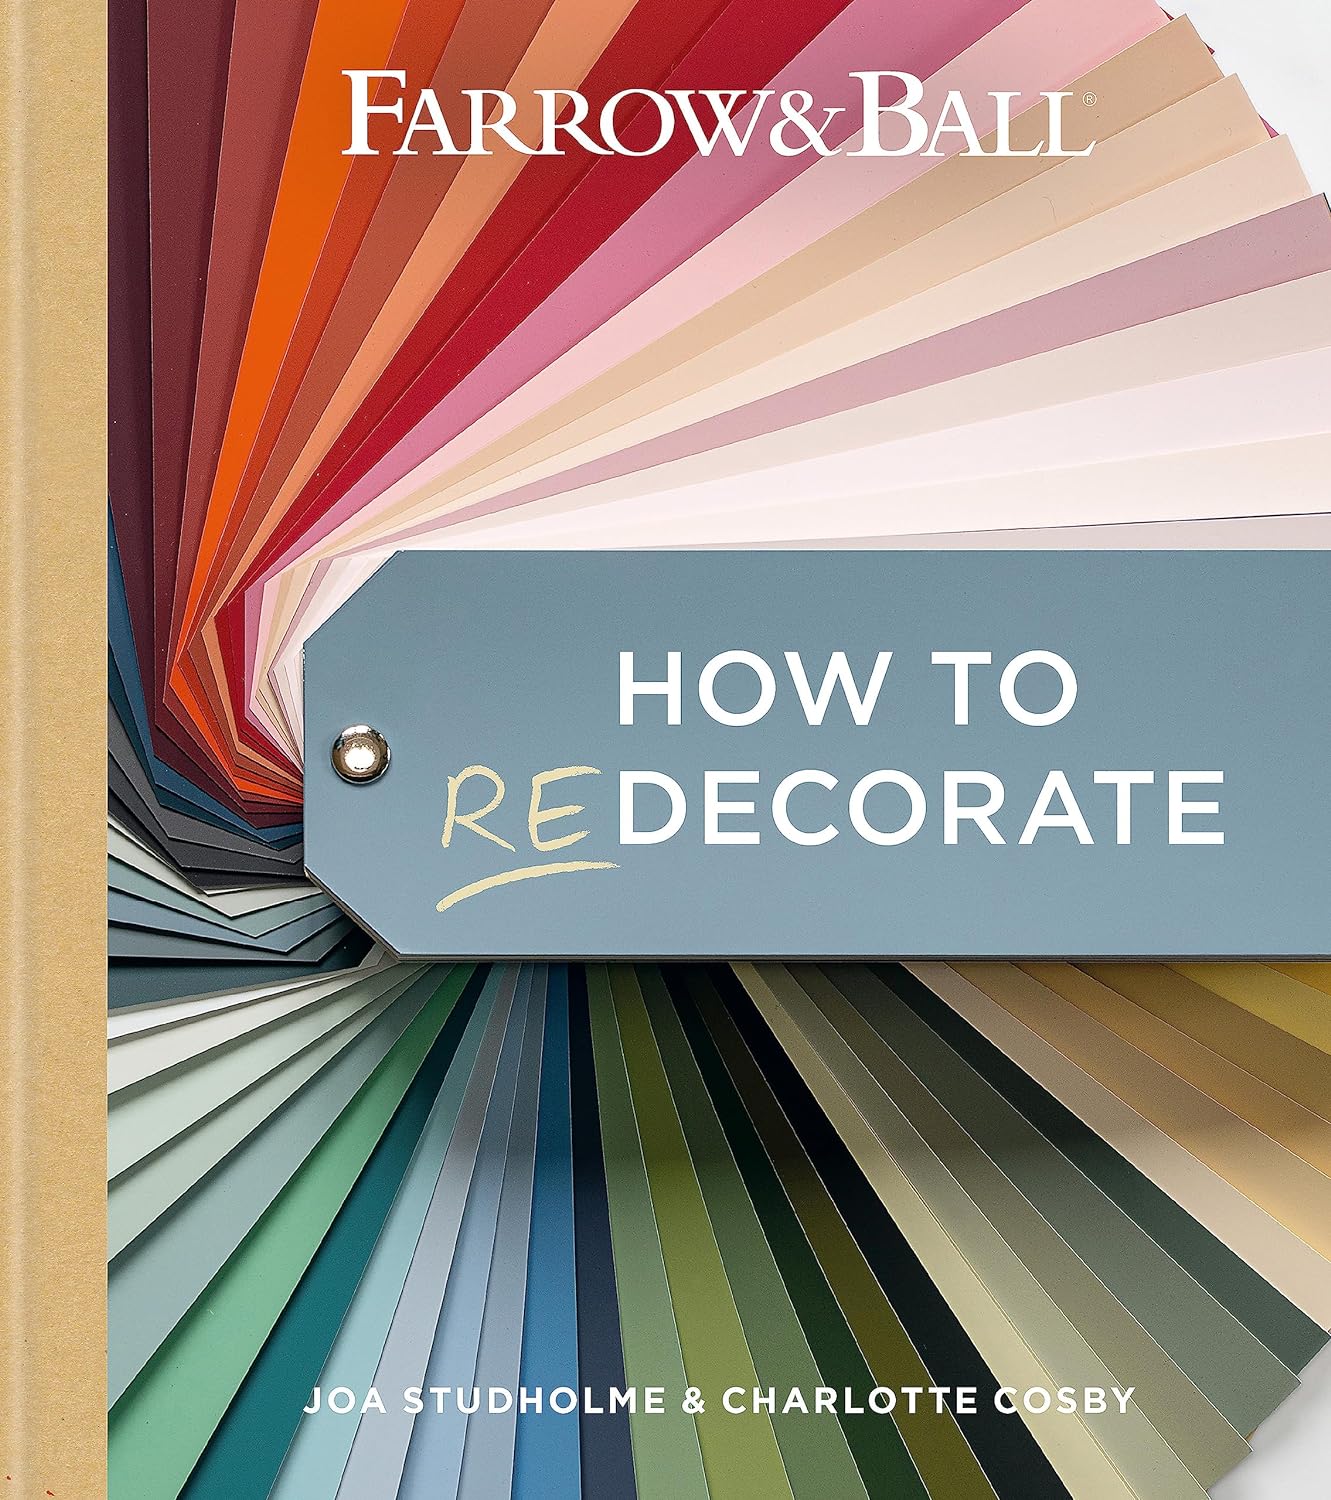 How to Redecorate